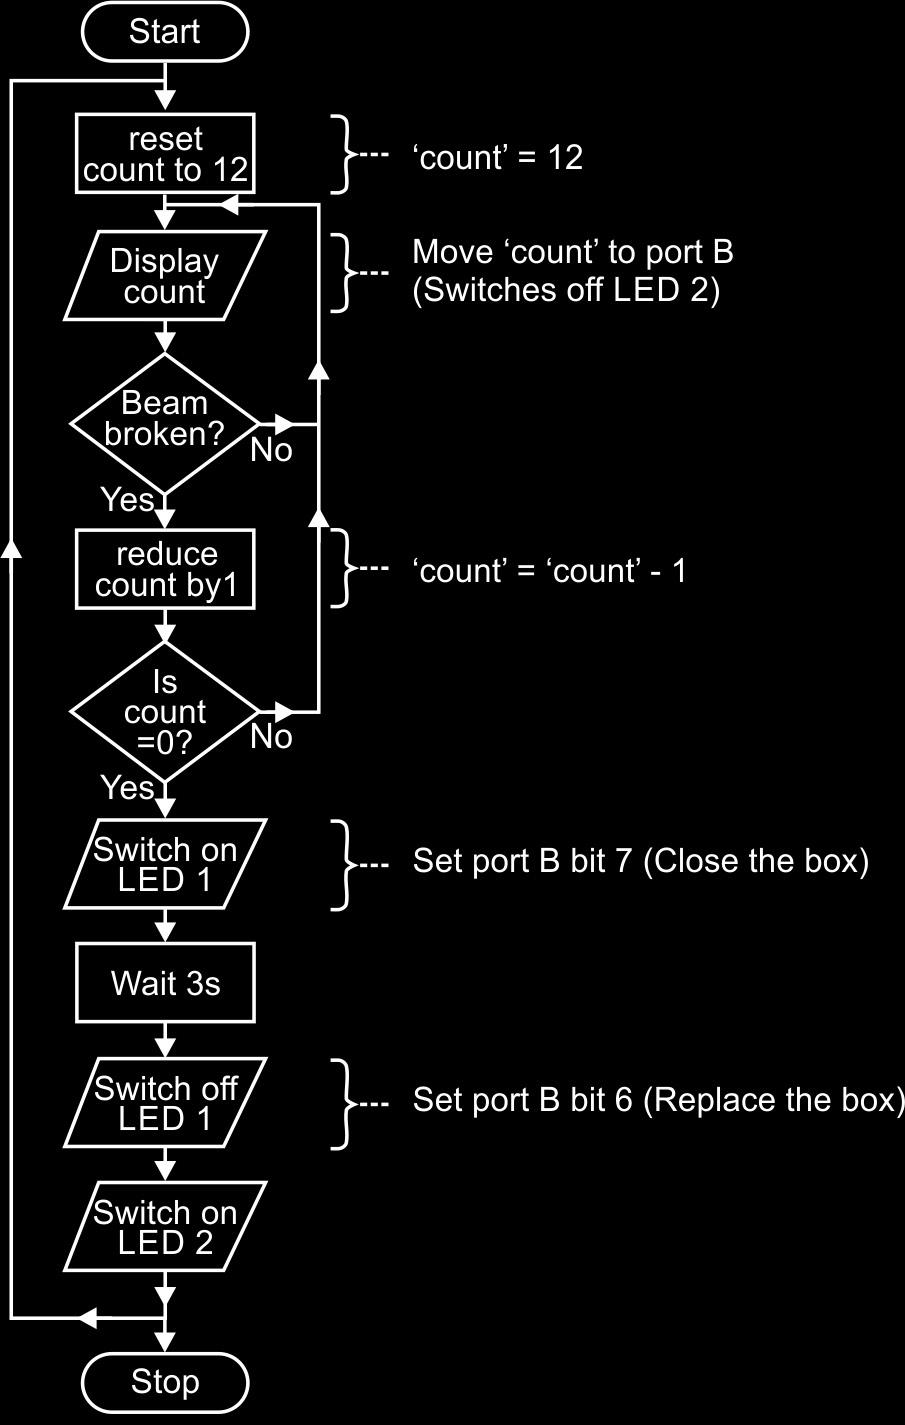 Program 9: The flowchart: The assembler code is: newbox clrf PORTA ; clear port A clrf PORTB ; clear port B movlw 12 ; move the count into the working register movwf PORTB ; display count in port B